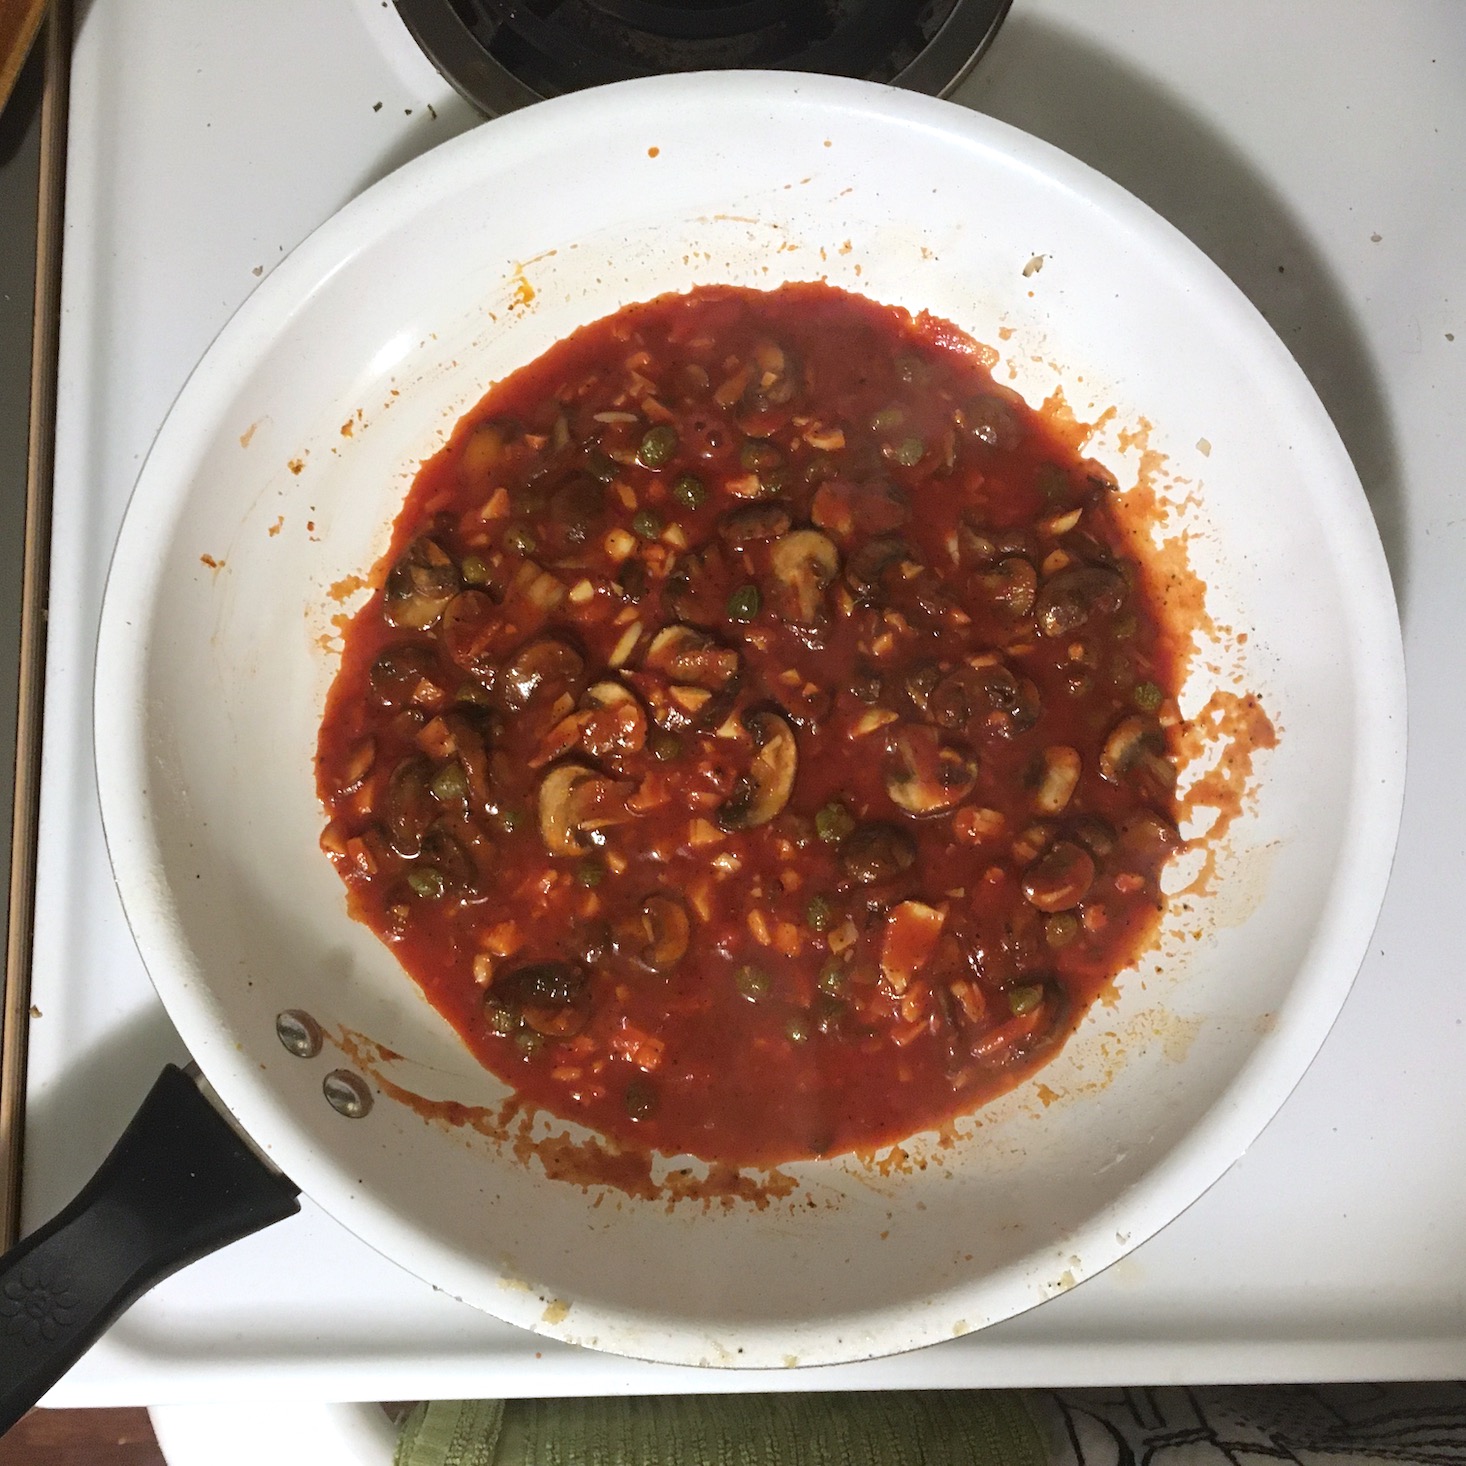 Blue Apron February 2020 - prosciutto and tomato pasta sauce formed in pan